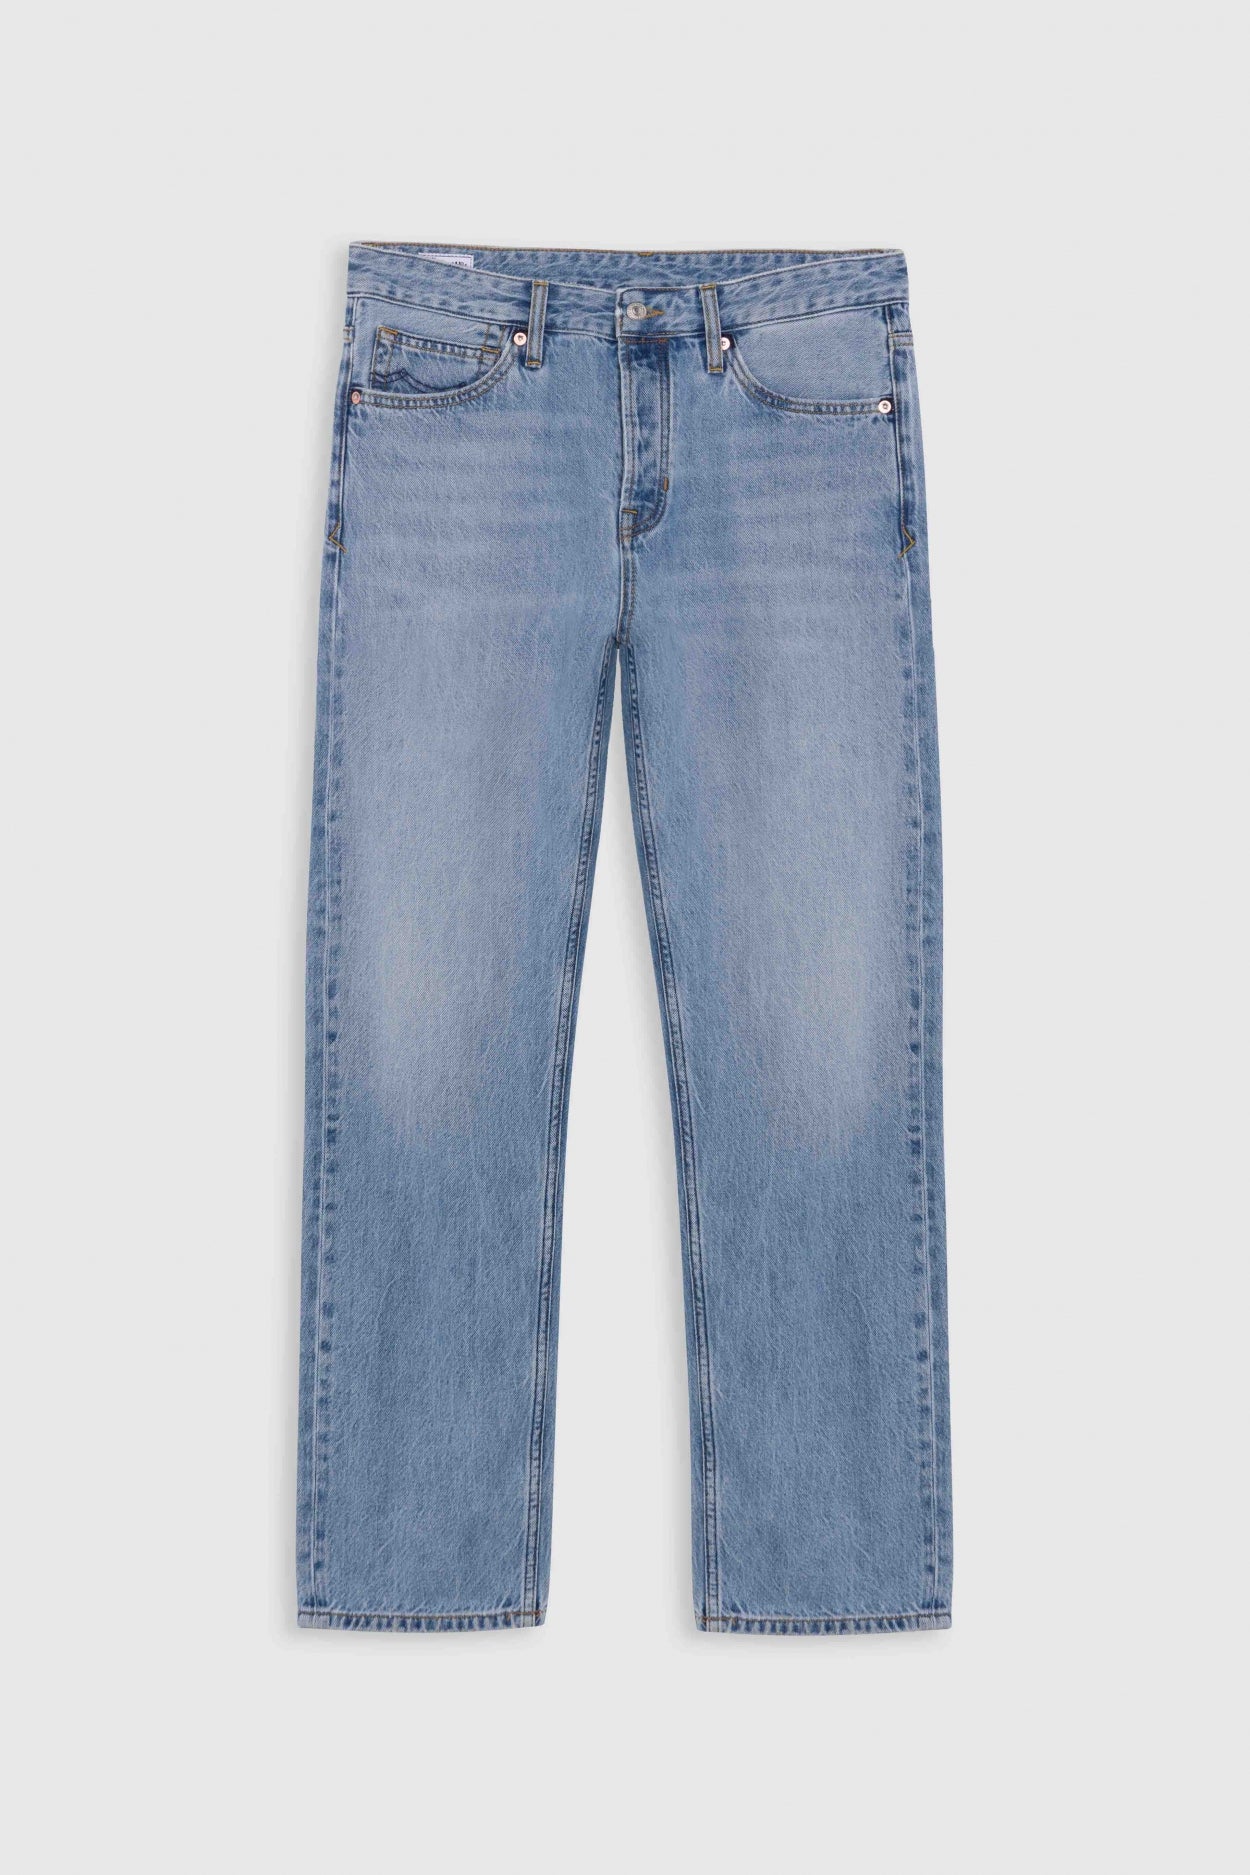 Jeans Roy Blue Reef Light Used